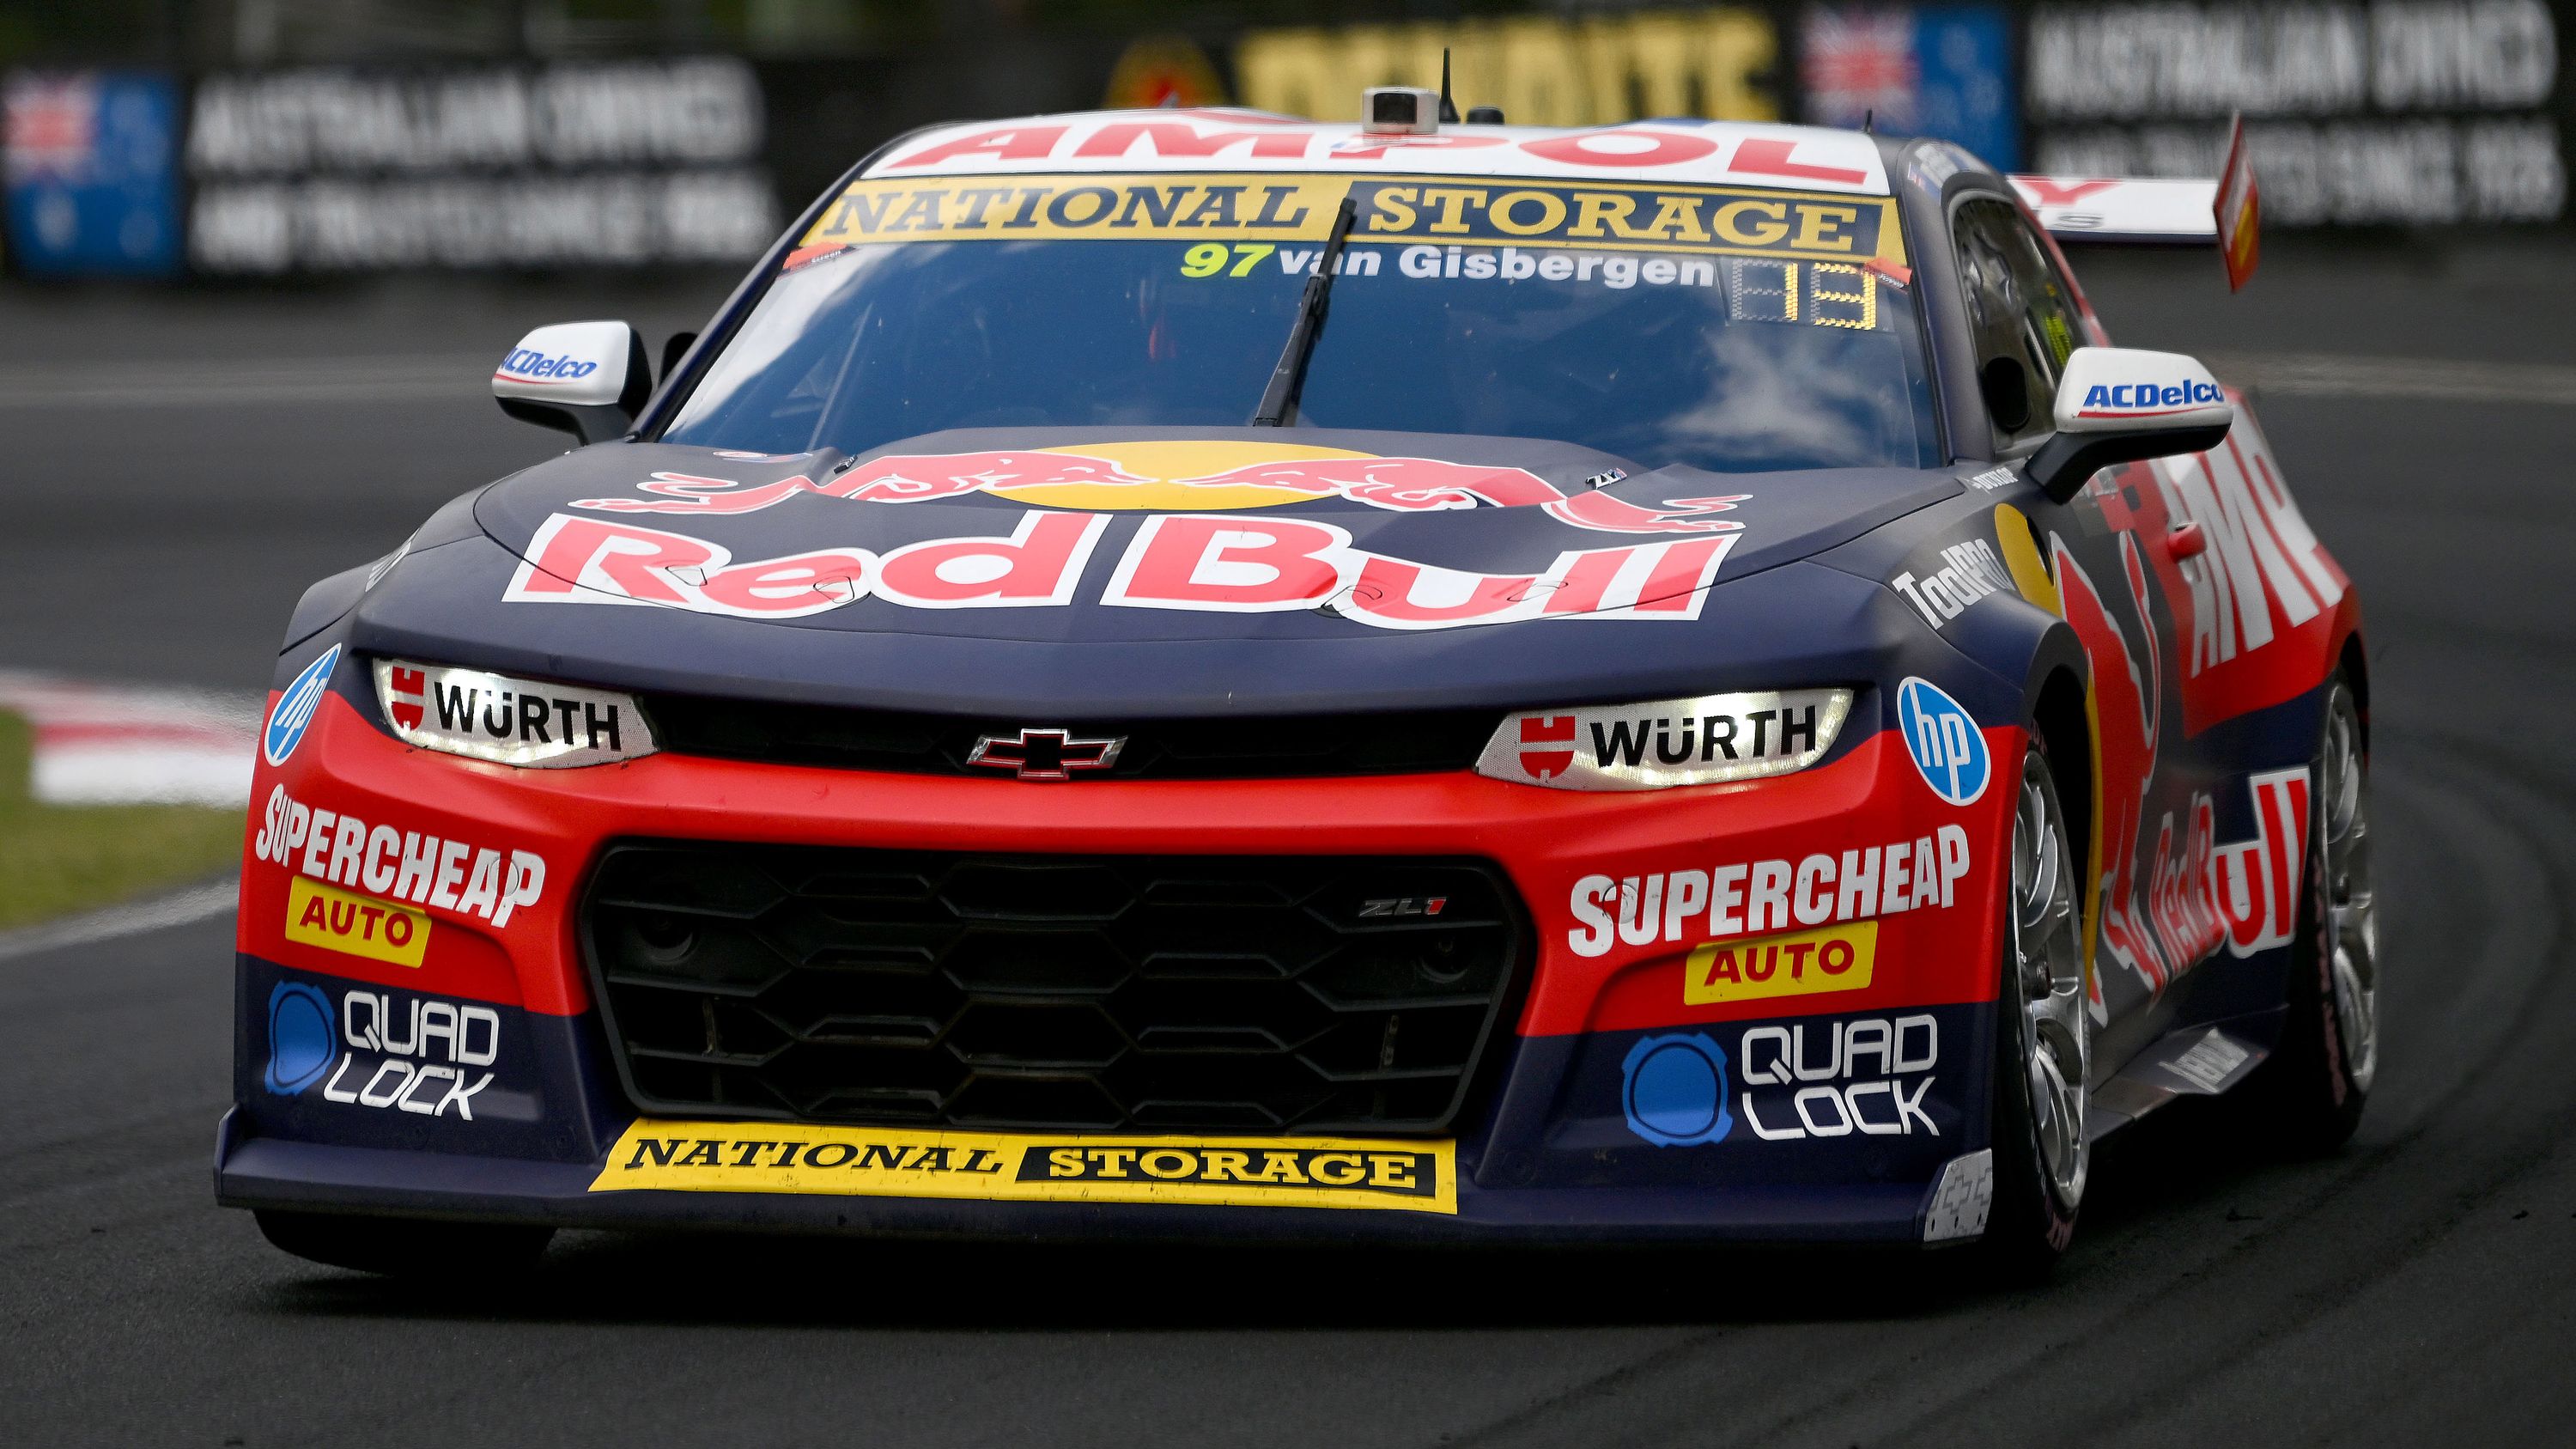 Shane van Gisbergen drives the Triple Eight Race Engineering Chevrolet Camaro in practice during the Bathurst 1000, part of the 2023 Supercars Championship Series at Mount Panorama on October 06, 2023 in Bathurst, Australia. (Photo by Morgan Hancock/Getty Images)